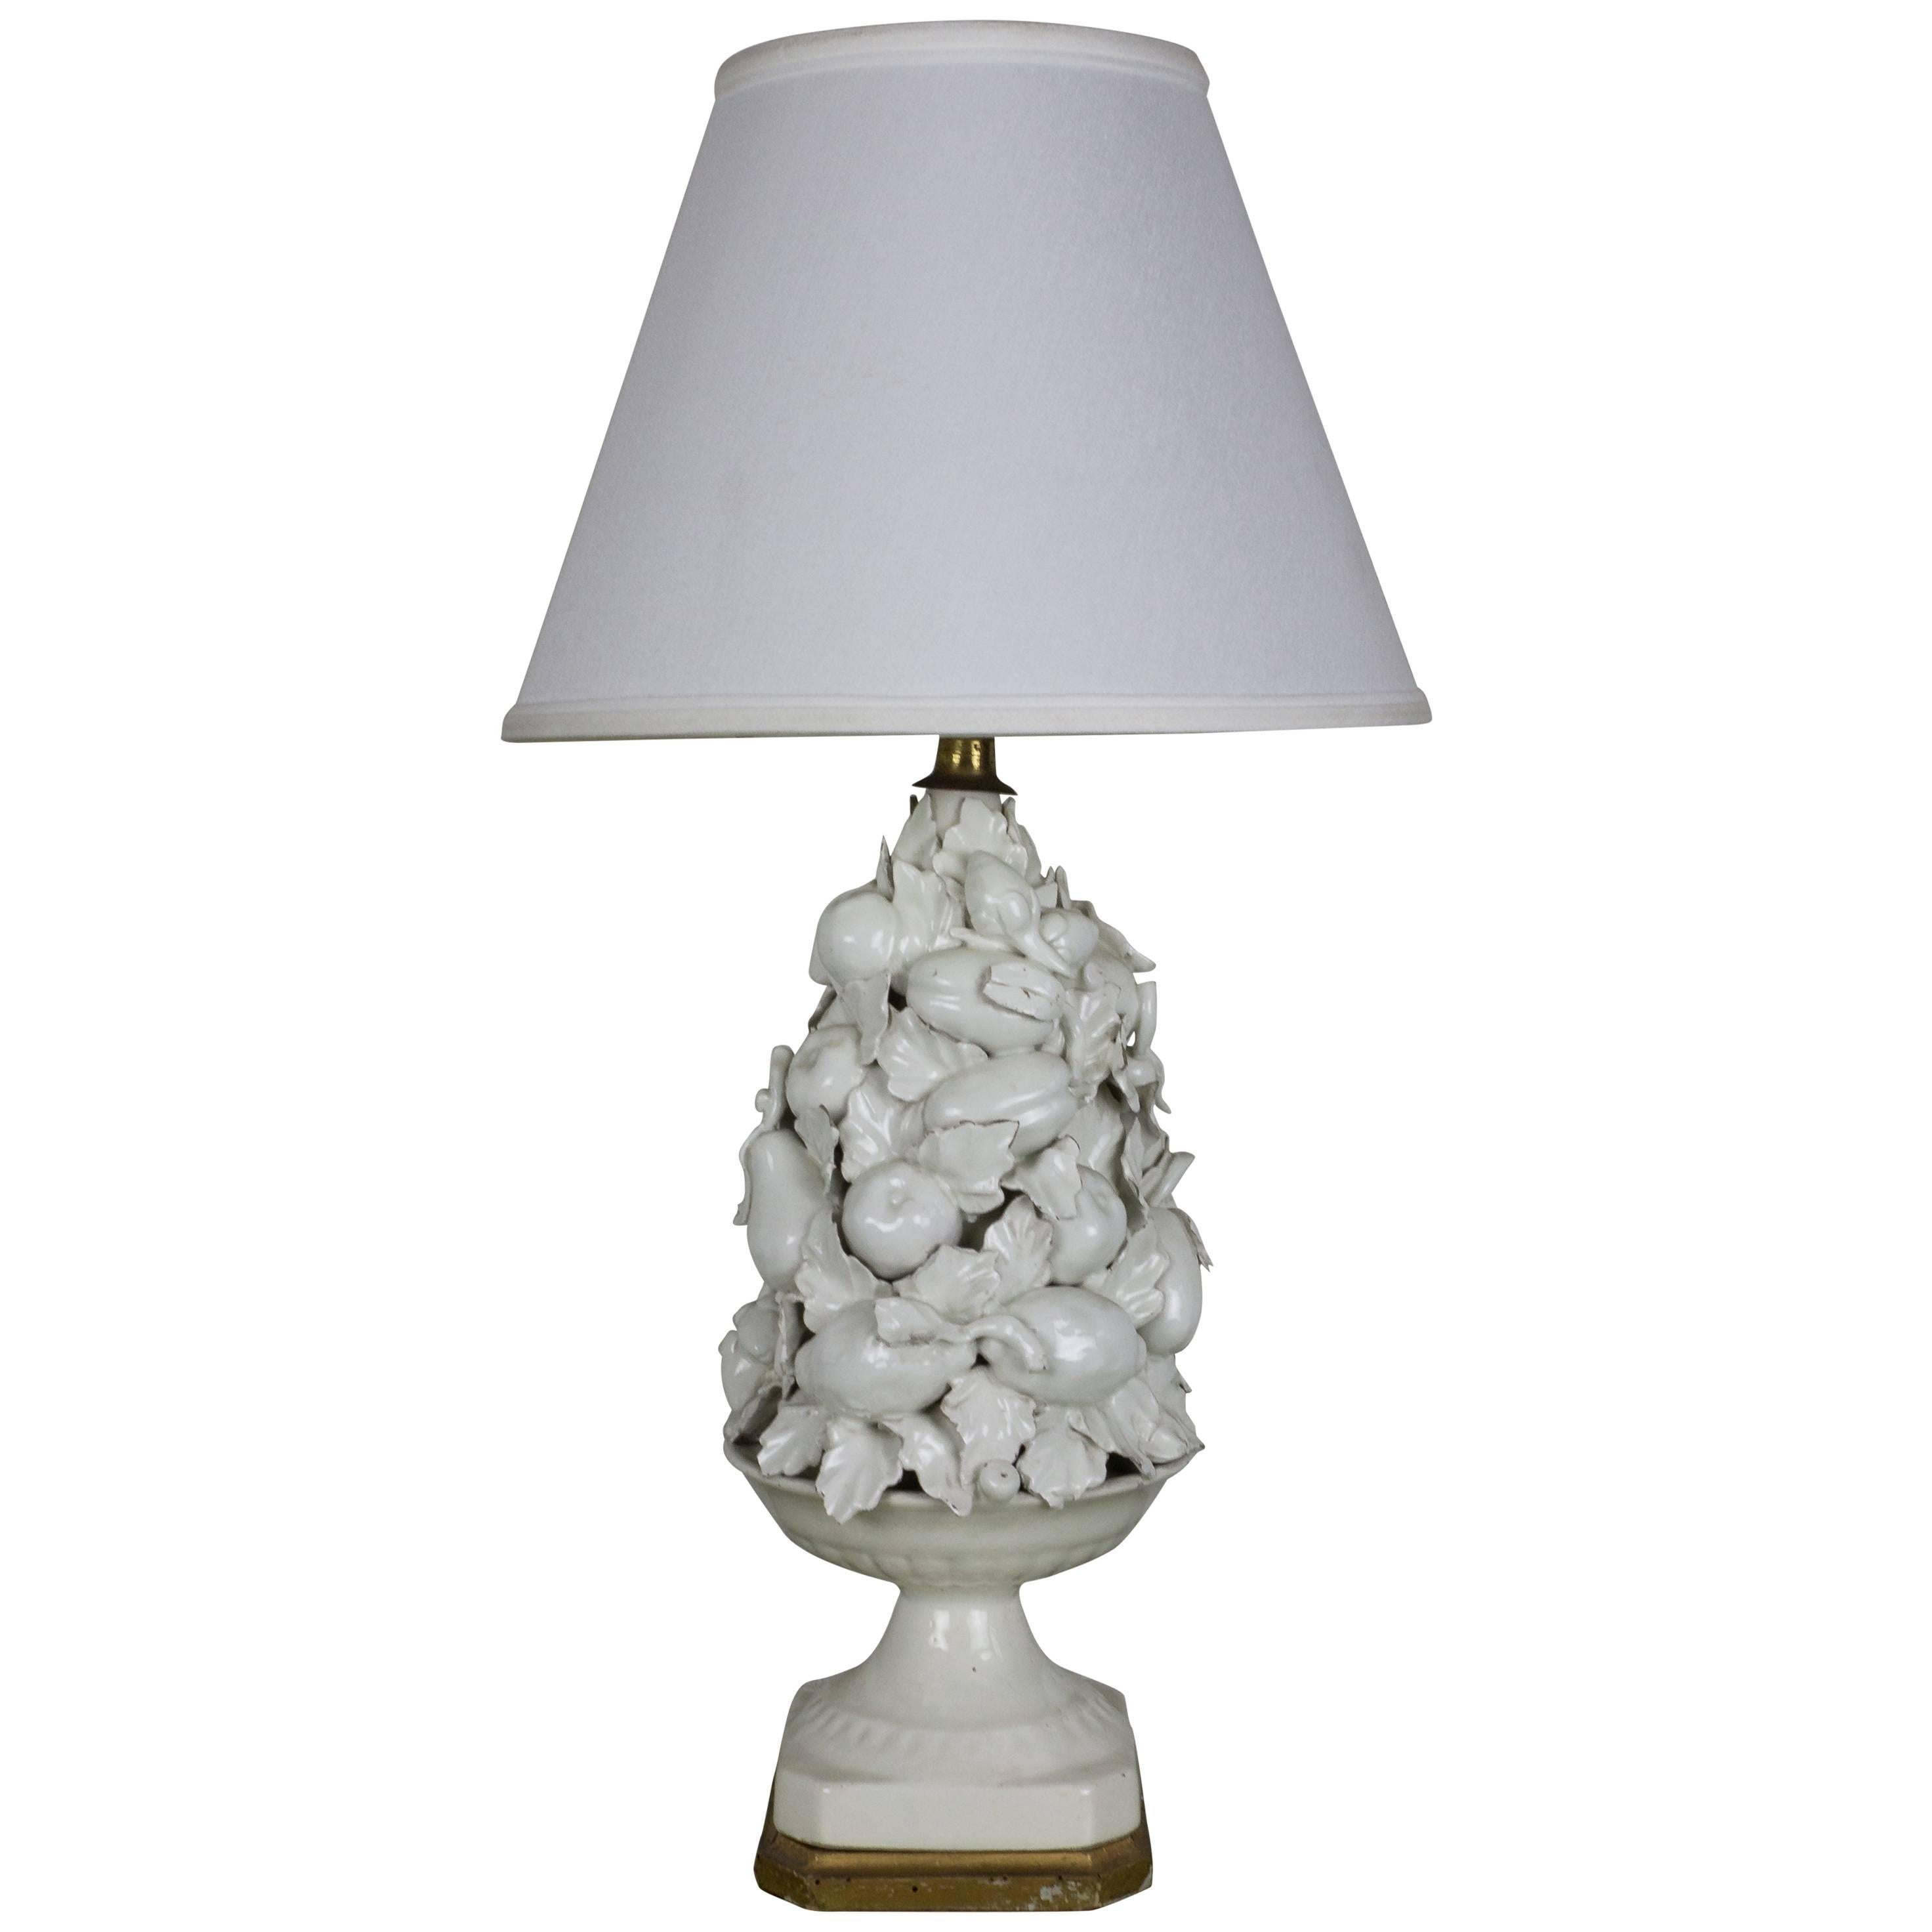 Spanish 1950s White Ceramic Table Lamp with Gilt Wooden Base